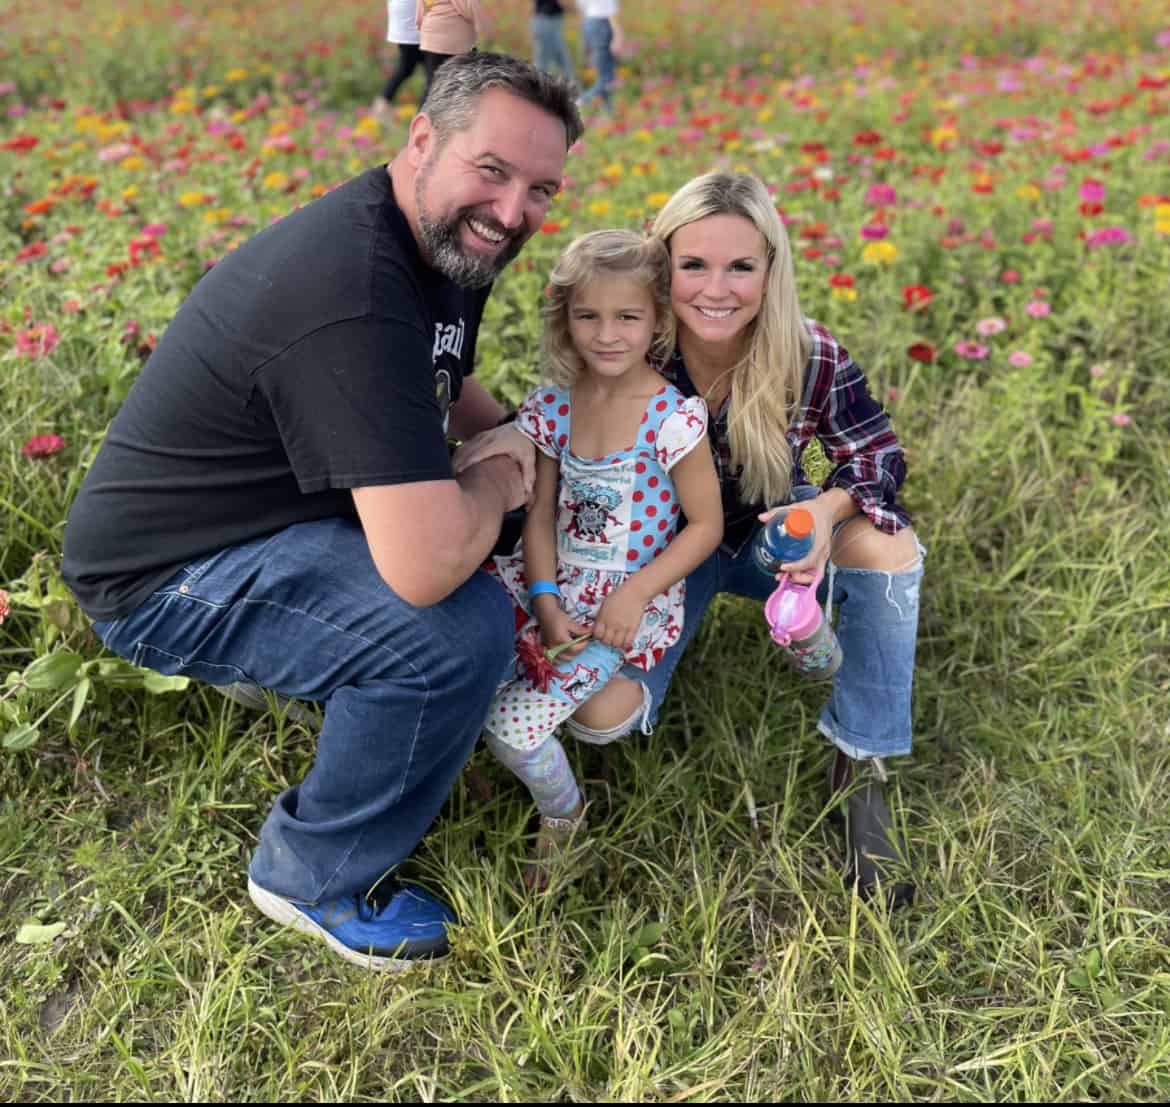 Best things to do in Wilmington NC - Pat Stoy his wife and daughter in wildflowers near the town center